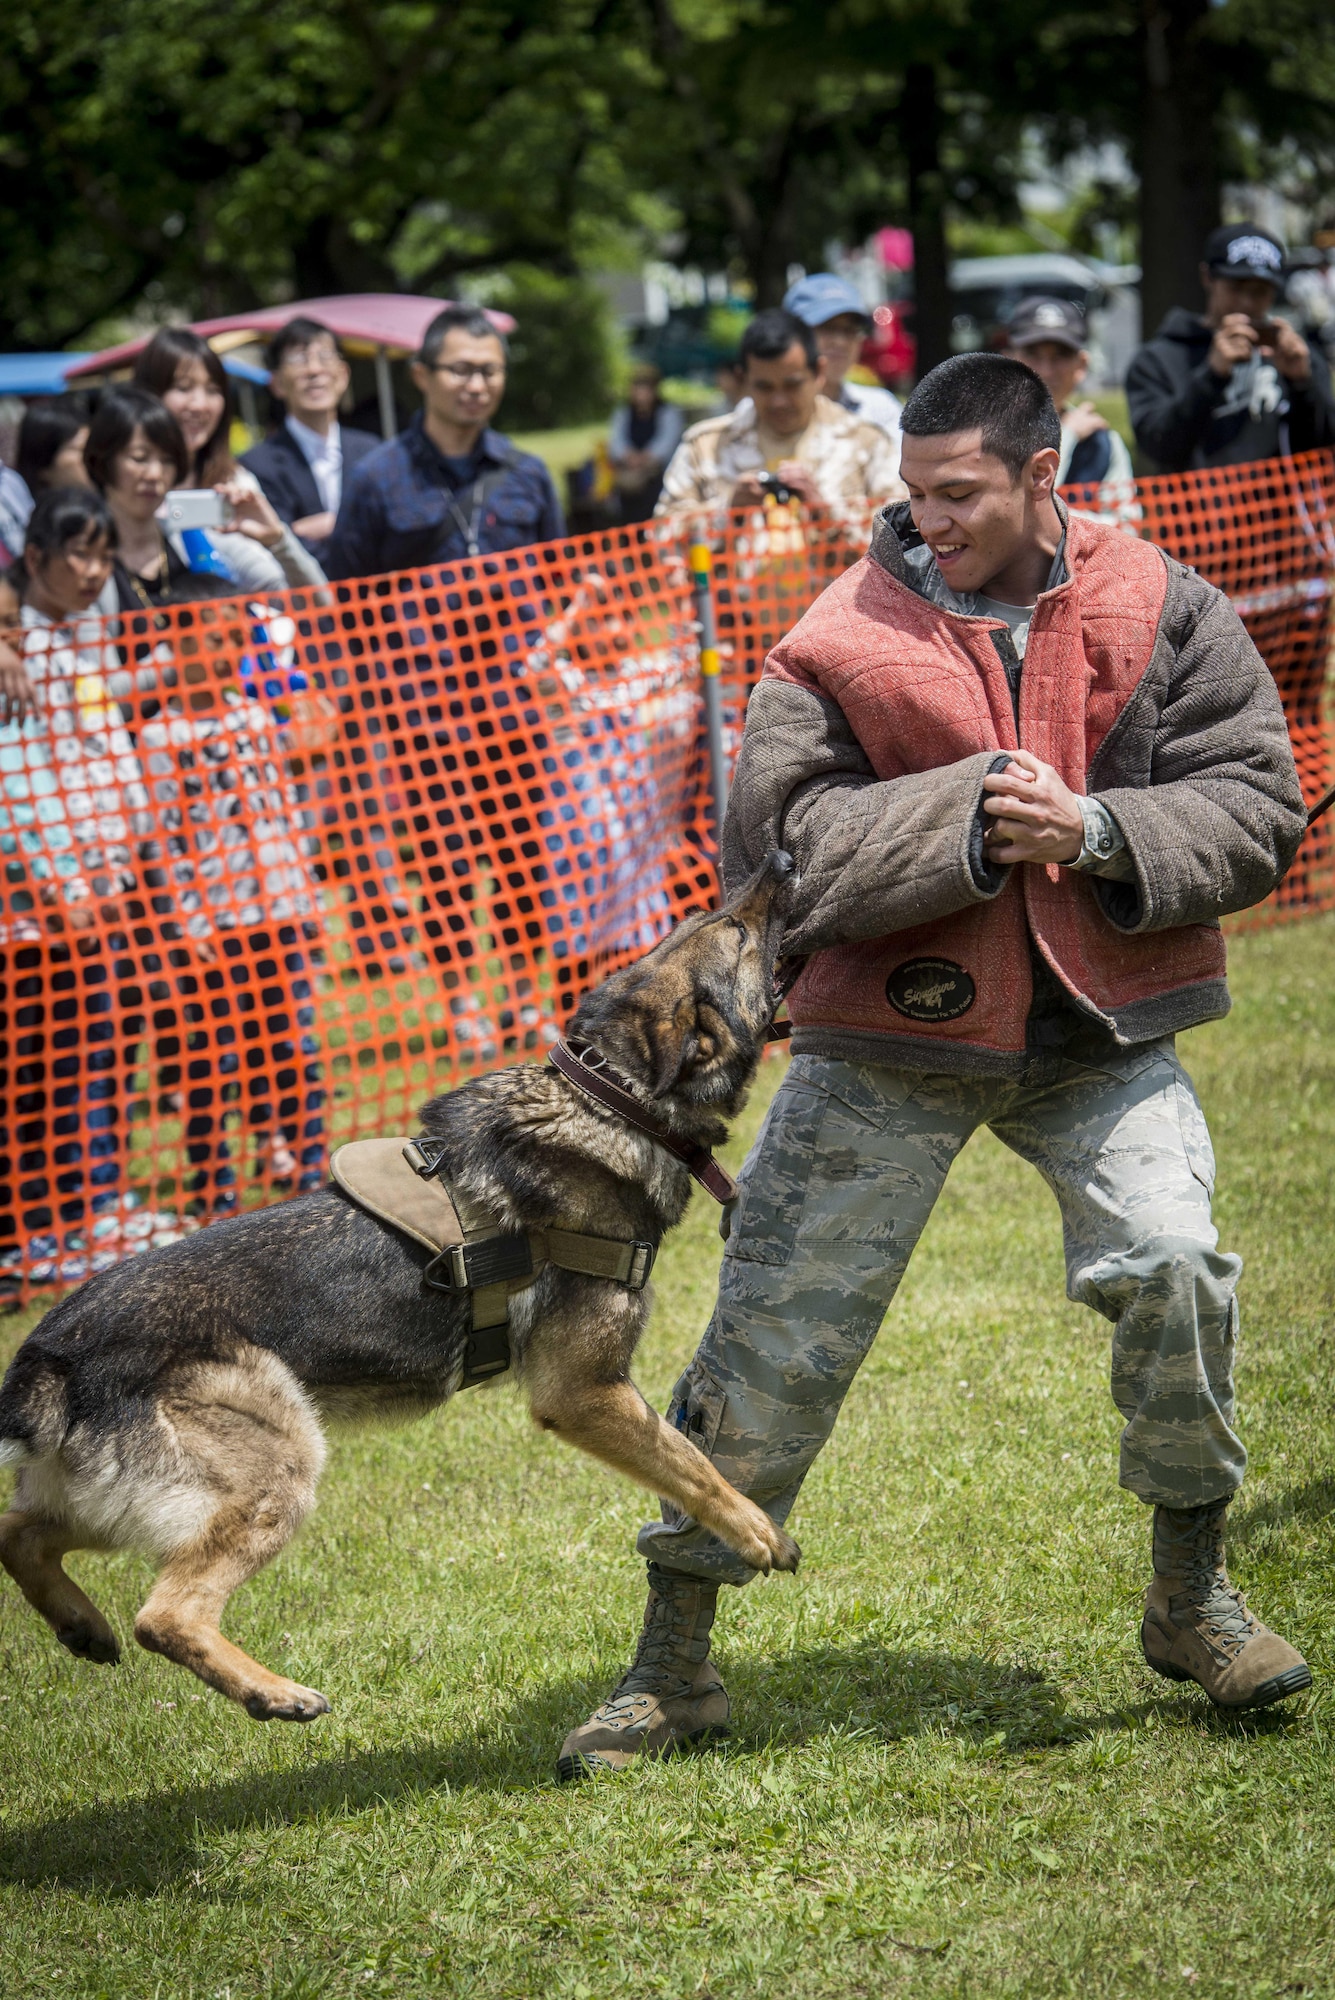 U.S. Air Force Senior Airman Juan Gamboa, a patrolman with the 35th Security Forces Squadron, braces for contact as a military working dog takes him down during a MWD capabilities demonstration as part of the 28th Annual American Day in Misawa City, Japan, June 5, 2016. Showcasing the region’s bilateral partnership among U.S. military and Japanese residents, more than 80,000 annual attendees interacted with volunteers from private base organizations at various American-based food booths sharing a taste of home. Americans and Japanese residents also participated in activities such as a family fun run, an American-themed parade, sports tournaments, street performances and a haunted house. Gamboa hails from Fort Stockton, Texas. (U.S. Air Force photo by Staff Sgt. Benjamin W. Stratton)